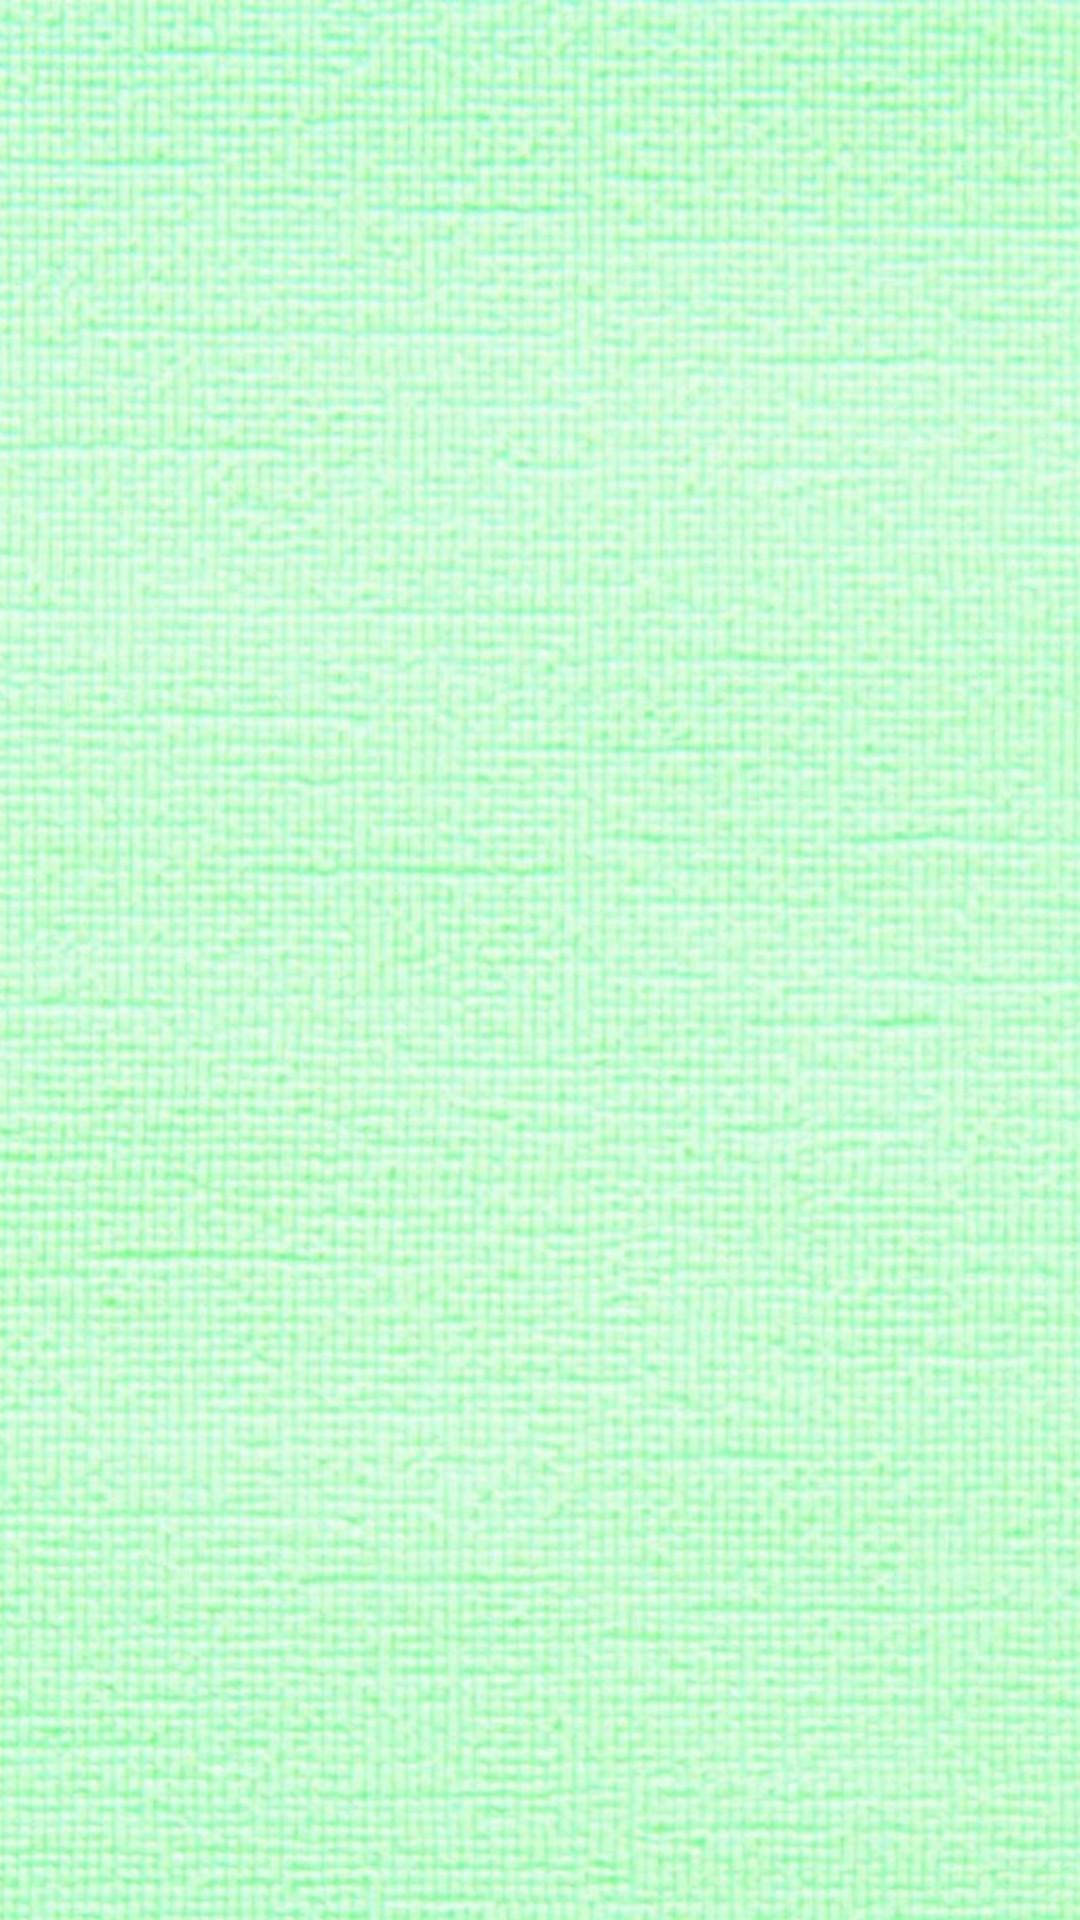 Mint Green HD Wallpapers Desktop Background  Android  iPhone 1080p  4k  35000